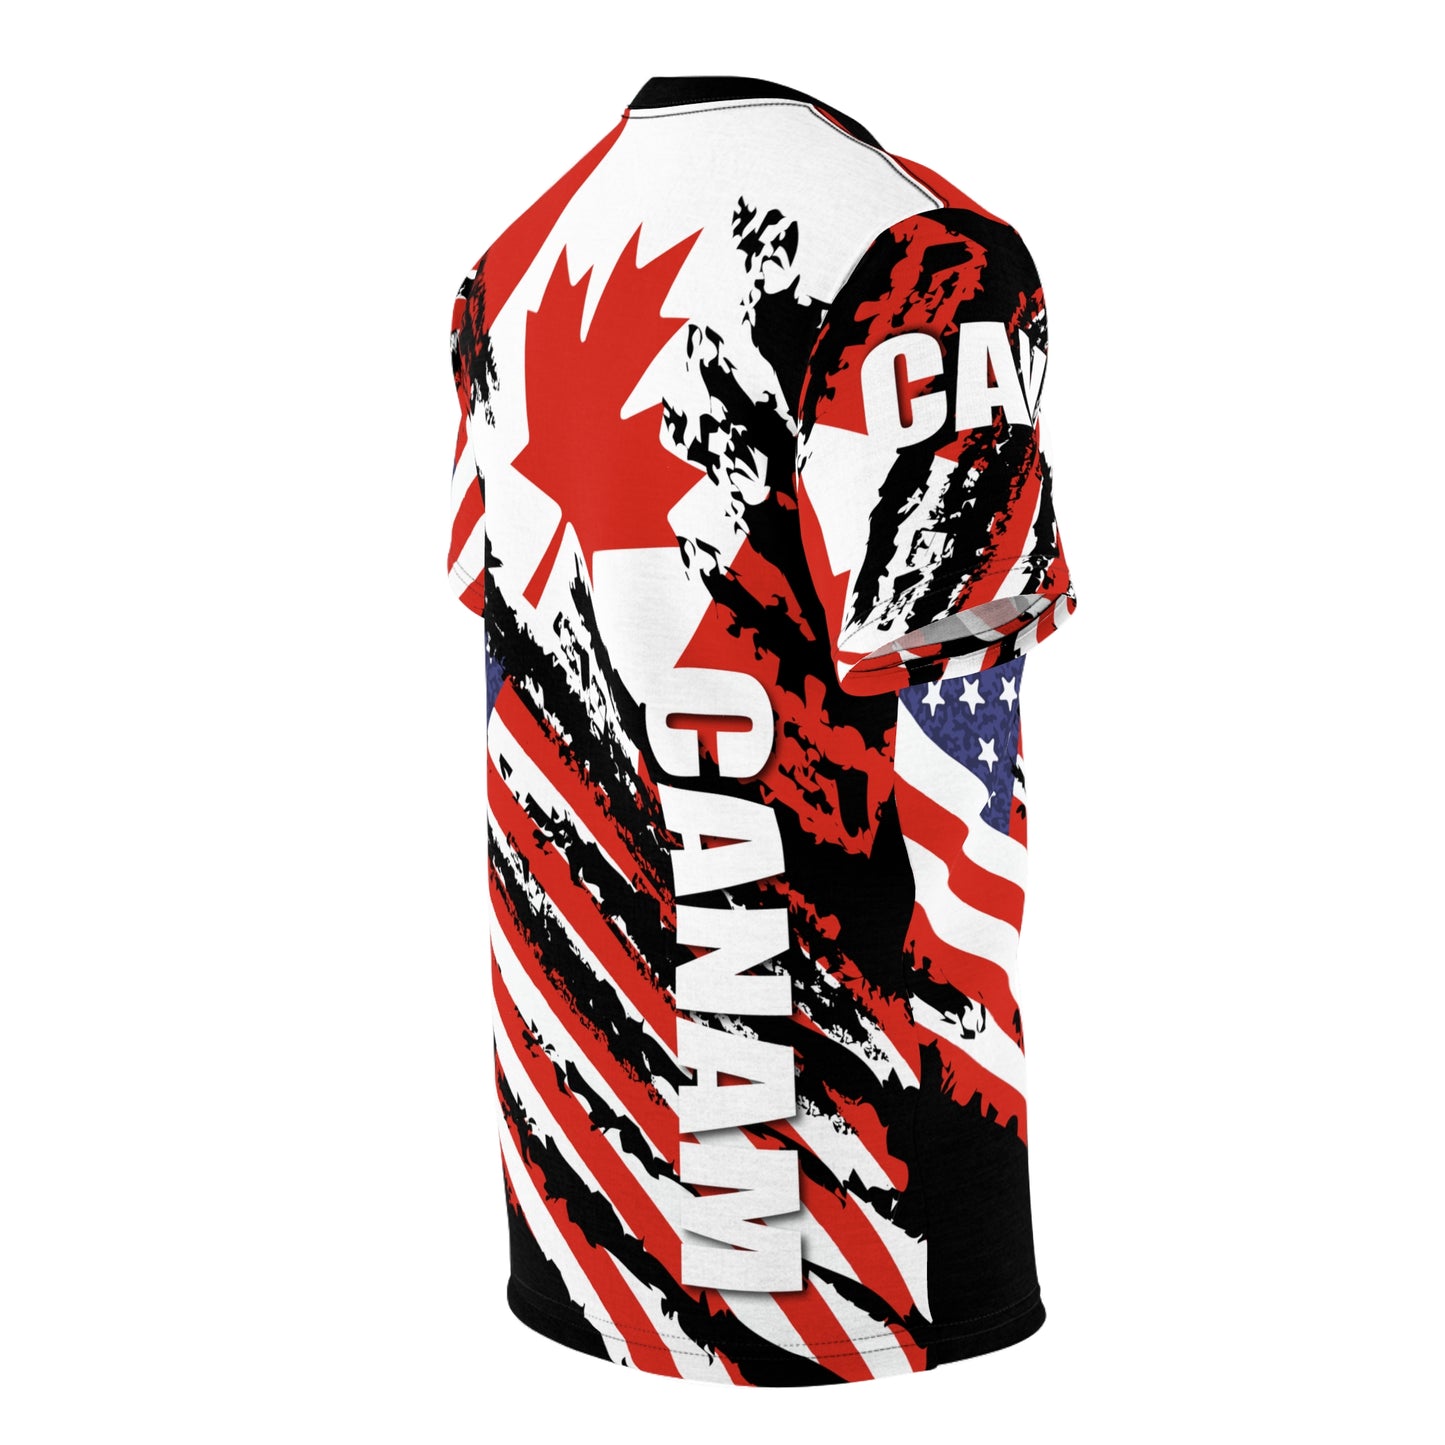 CANAM FLYBALL Unisex JERSEY